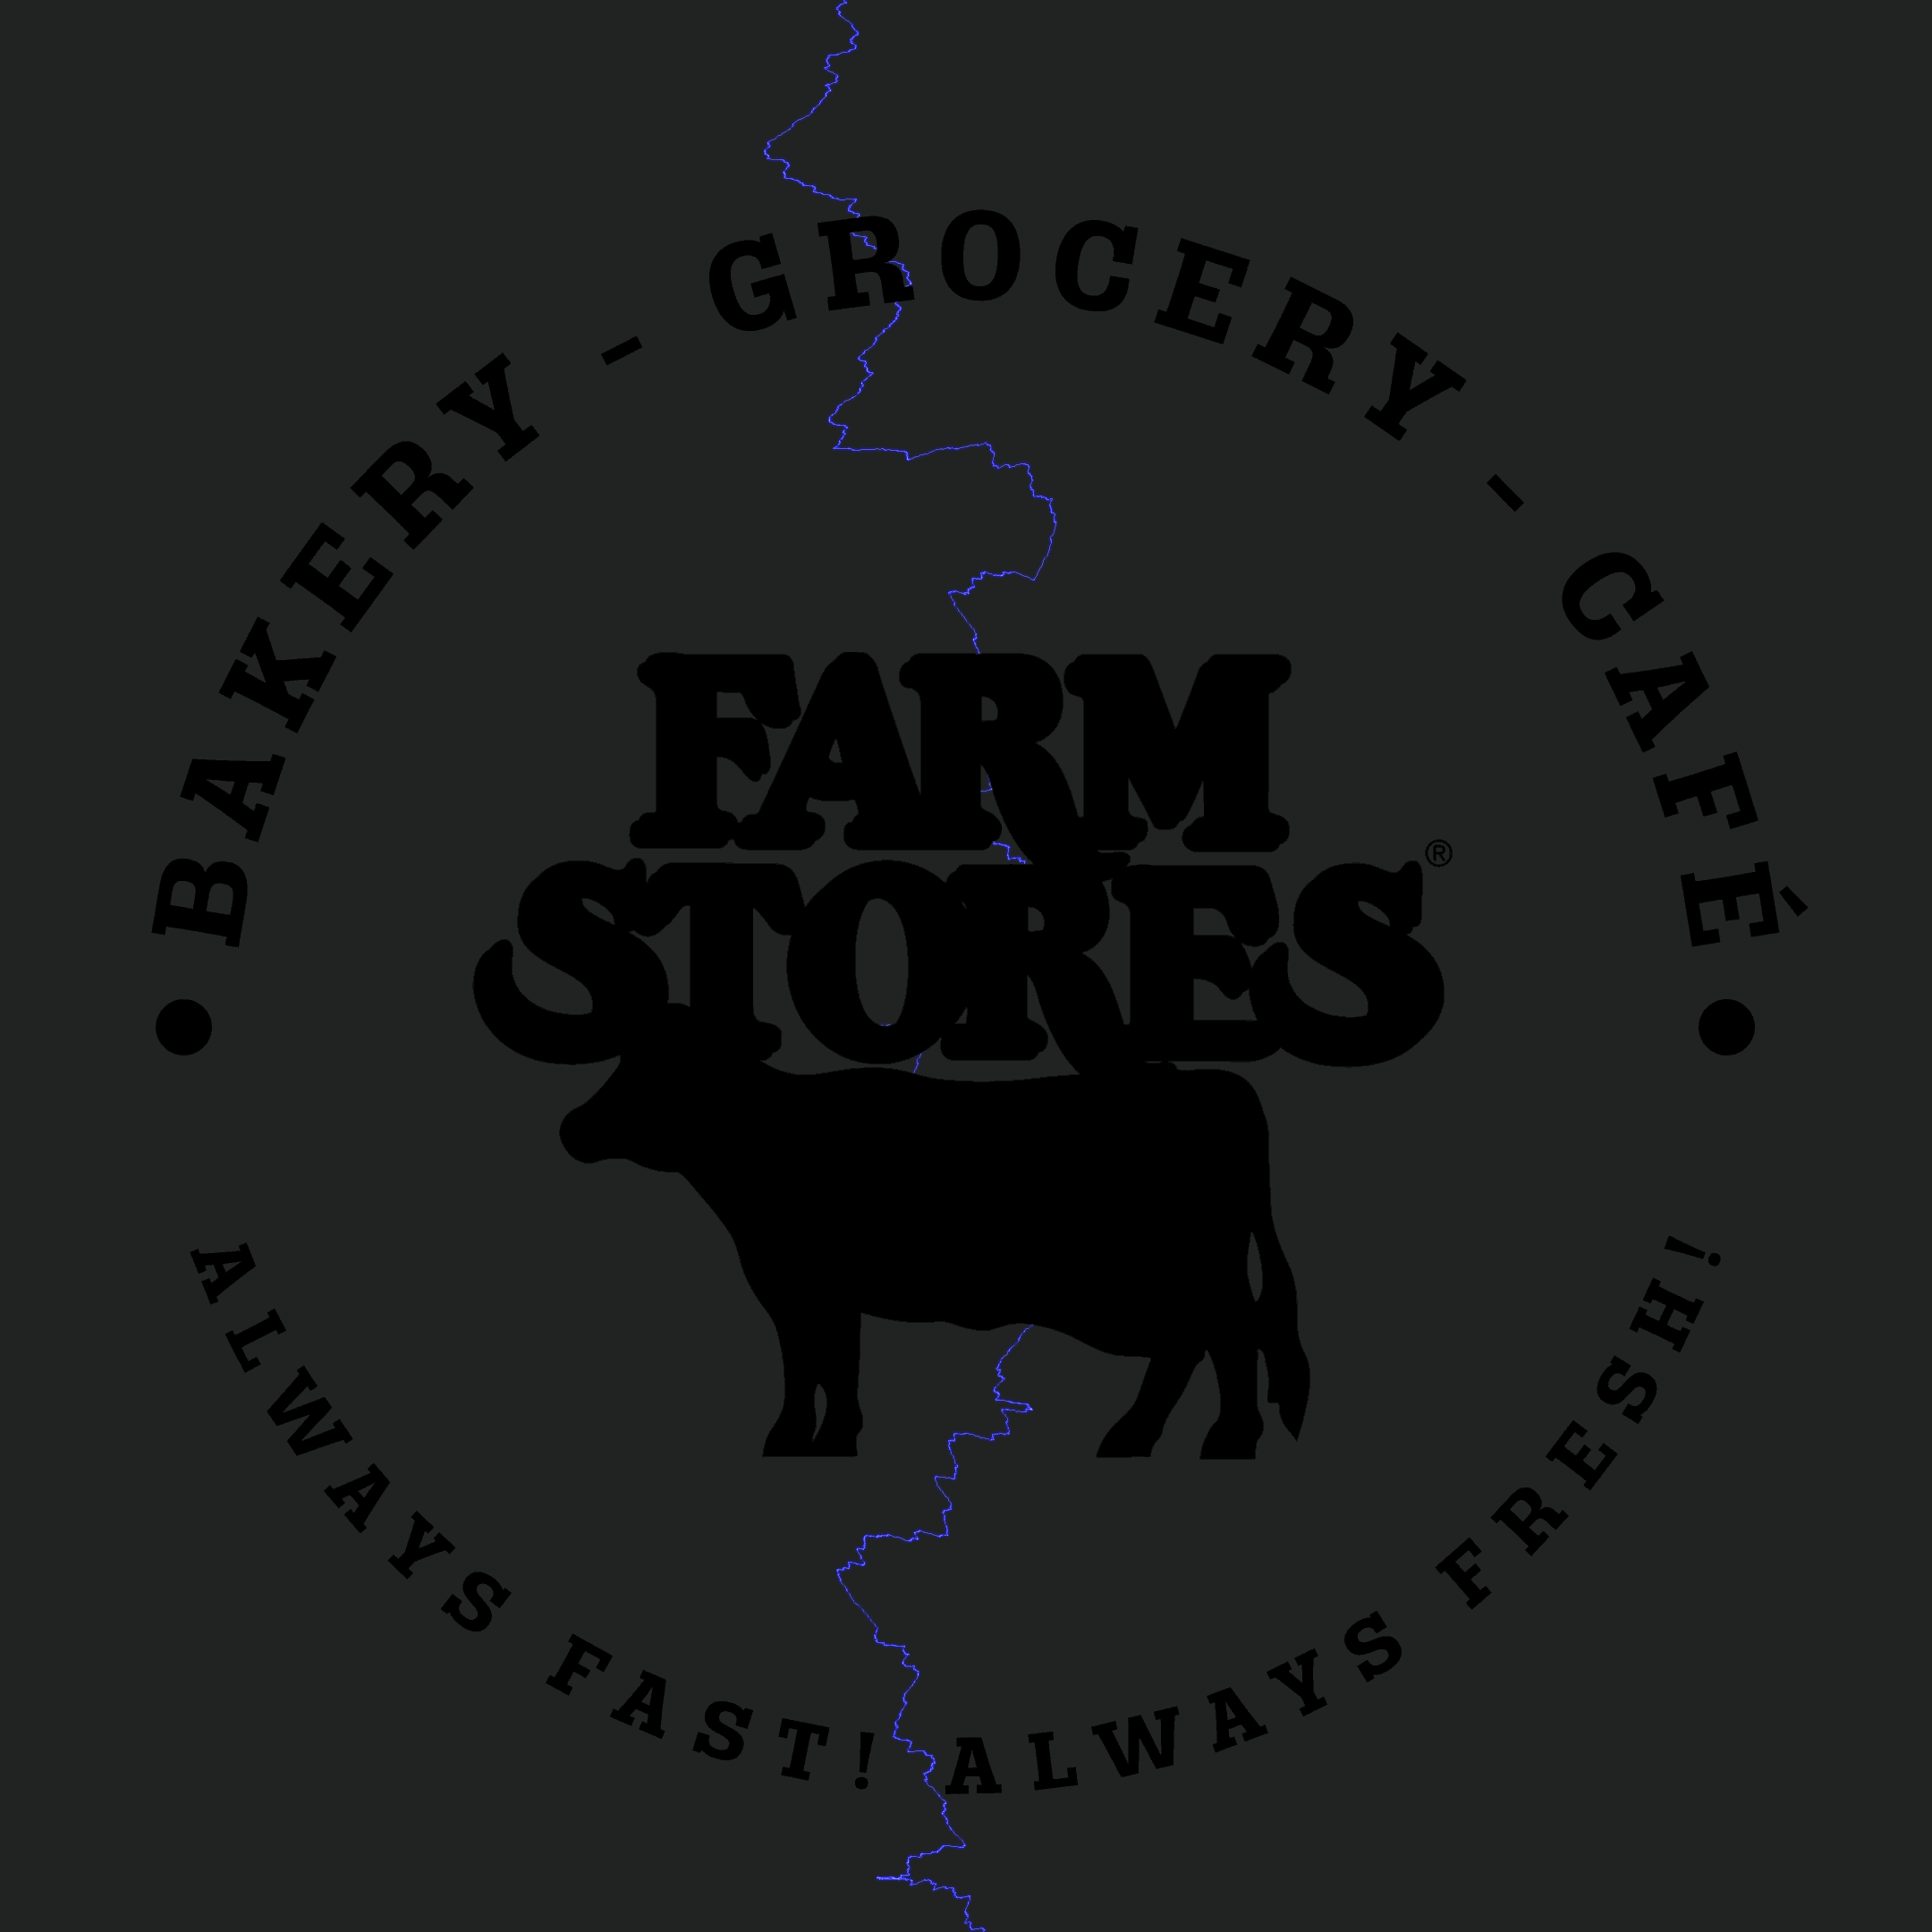 – Farm Stores is Frikin Awesome